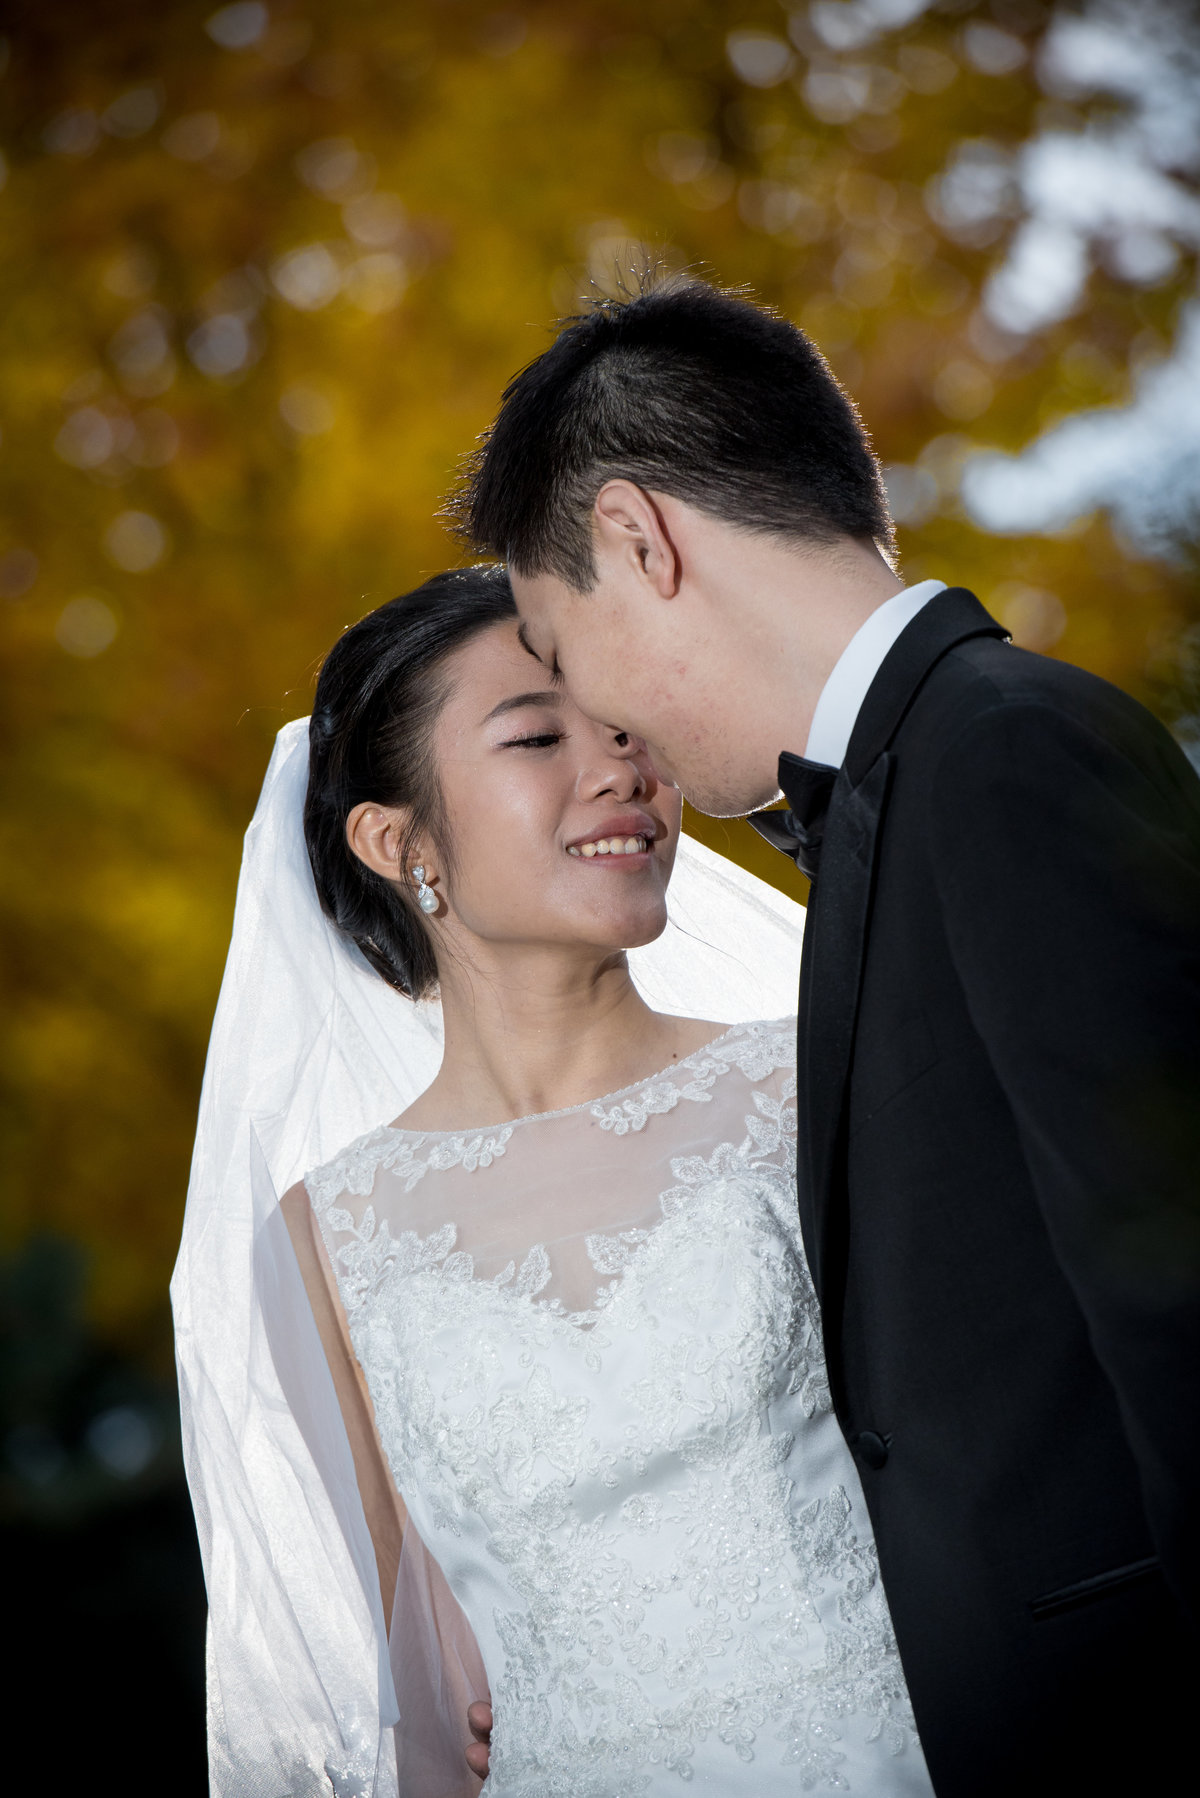 Bride and groom rest their heads together in front of a tree of yellow autumn leaves